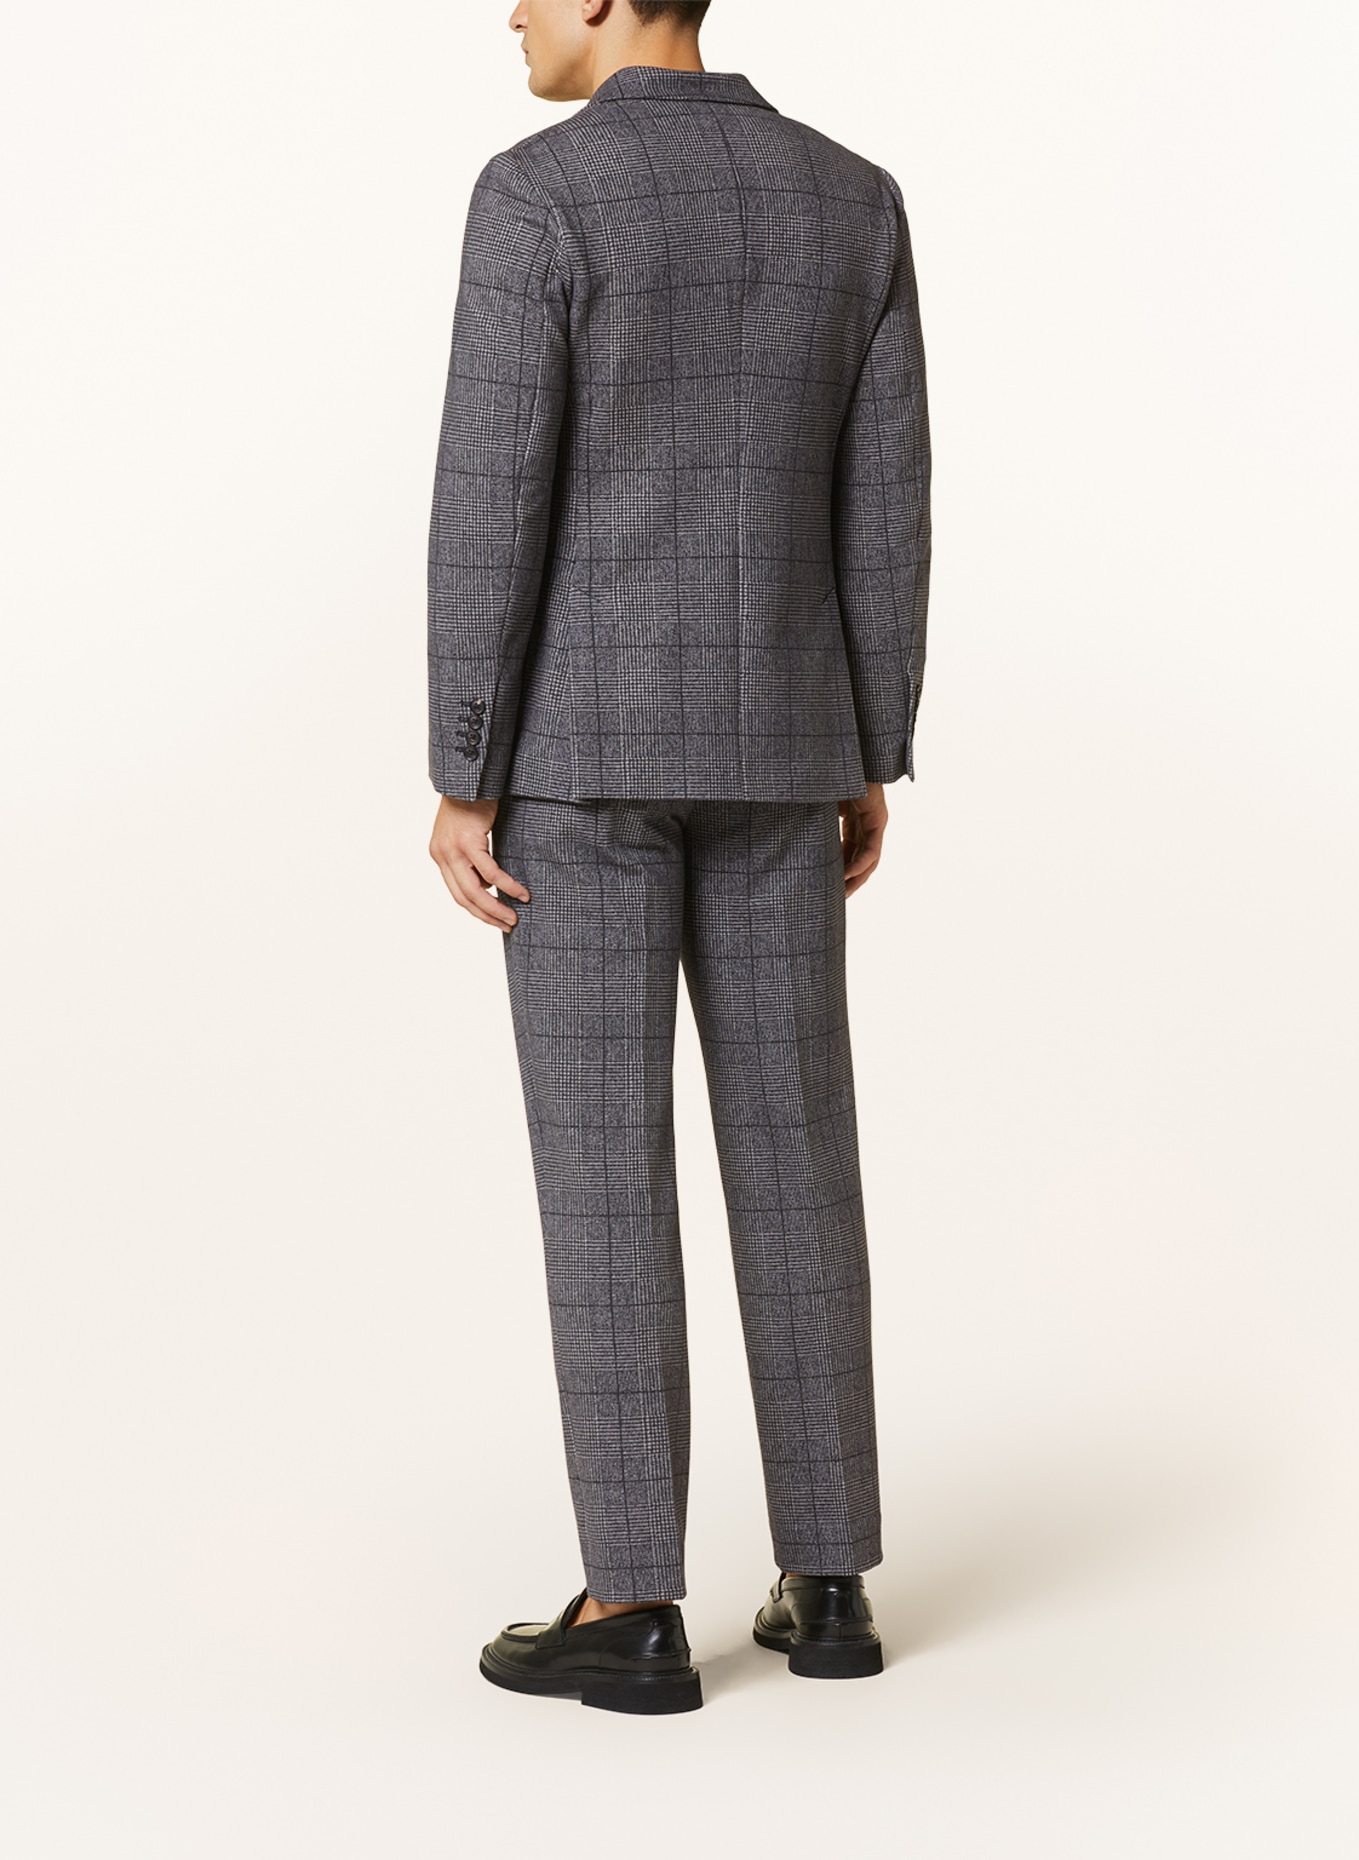 CIRCOLO 1901 Suit jacket extra slim fit made of jersey, Color: DARK BLUE/ LIGHT GRAY (Image 3)